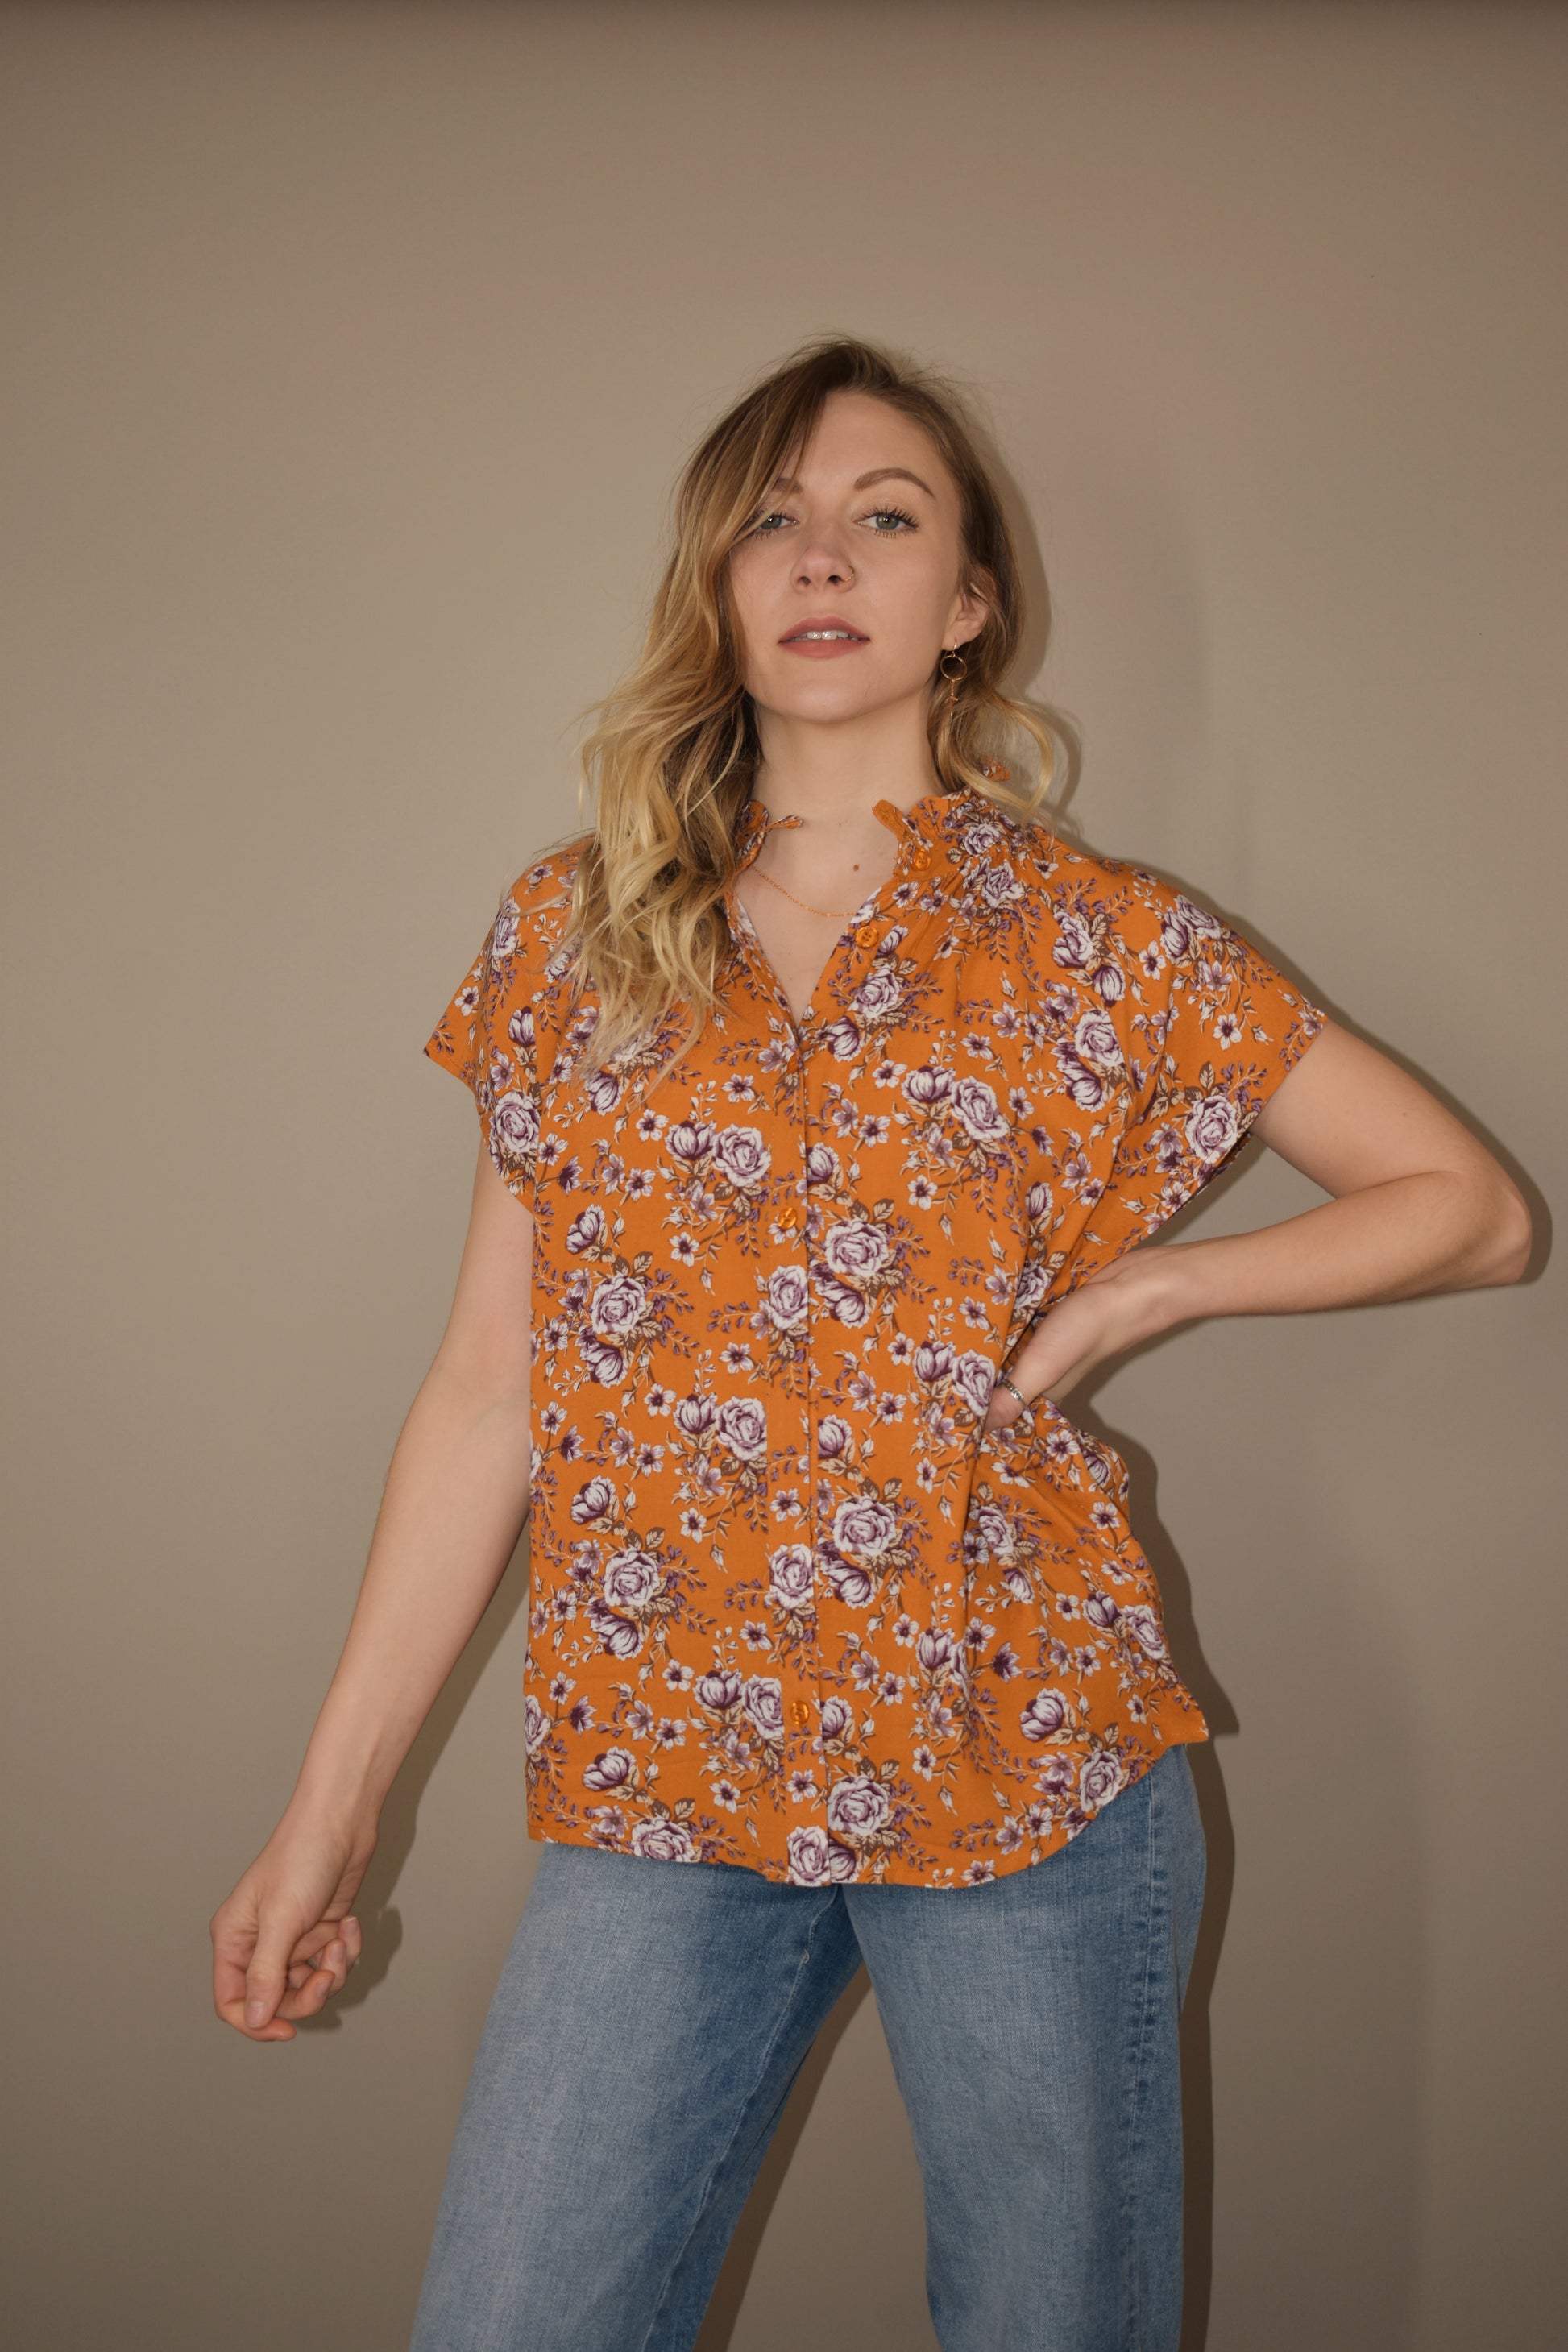 tangerine button down relaxed fit blouse with white and purple floral pattern. ruffle collar. flutter cap sleeves. full length